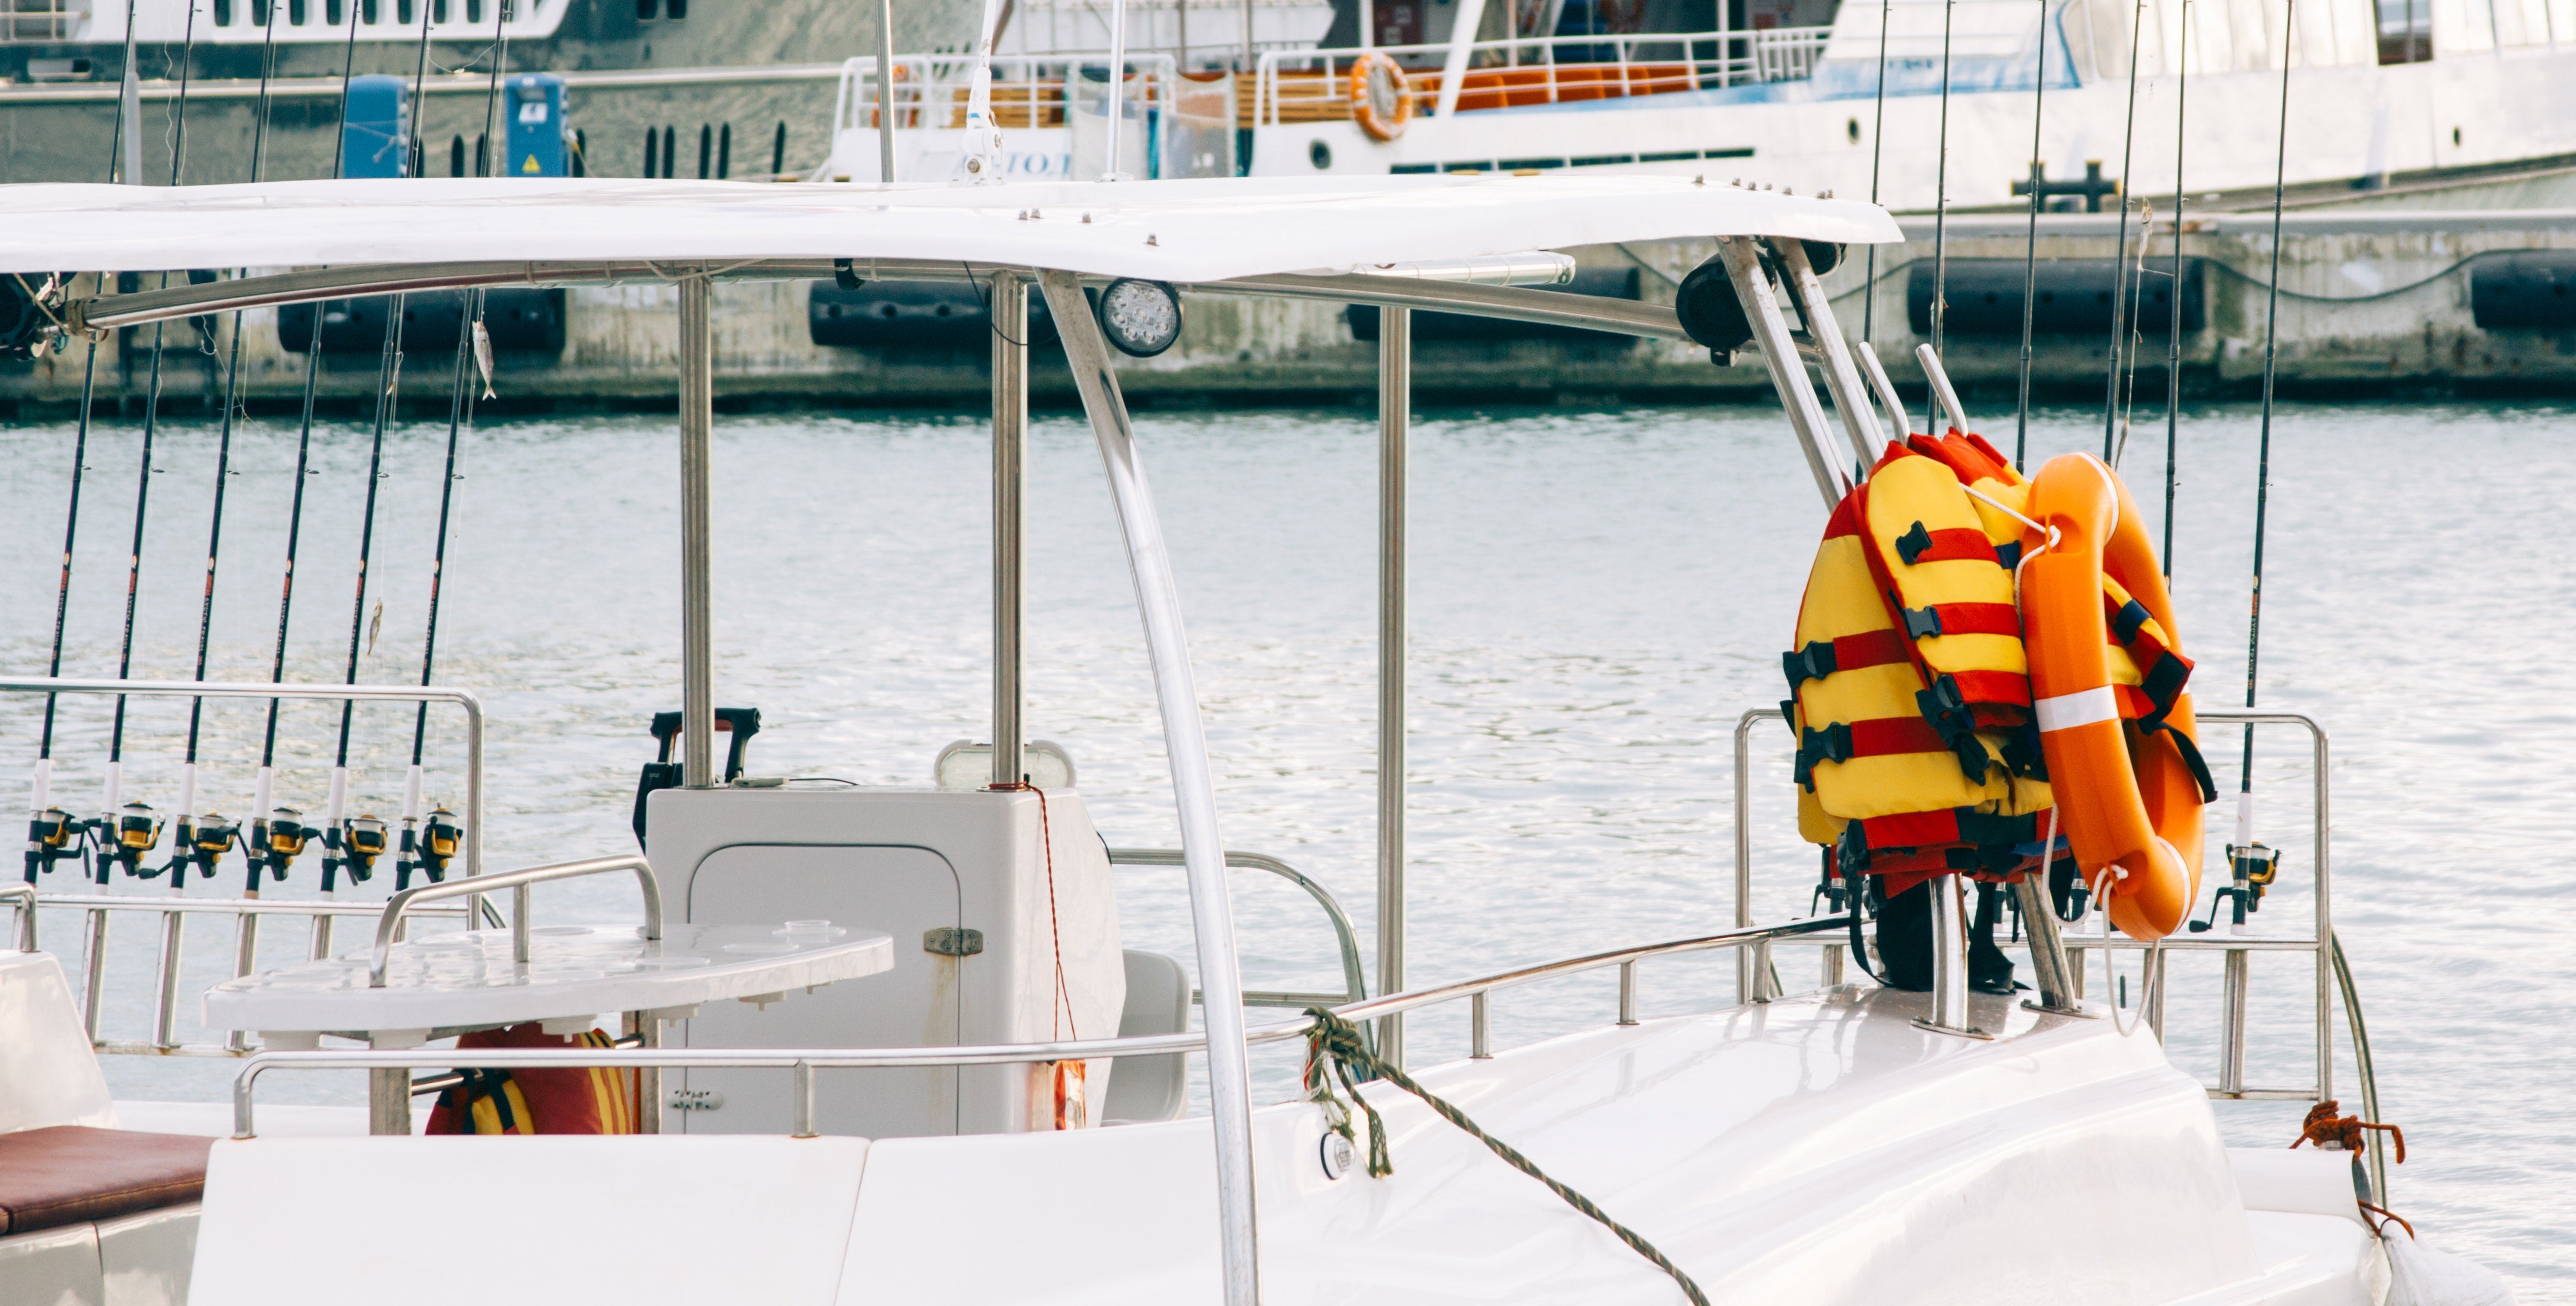 Boating Essentials: What To Have On Your Boat